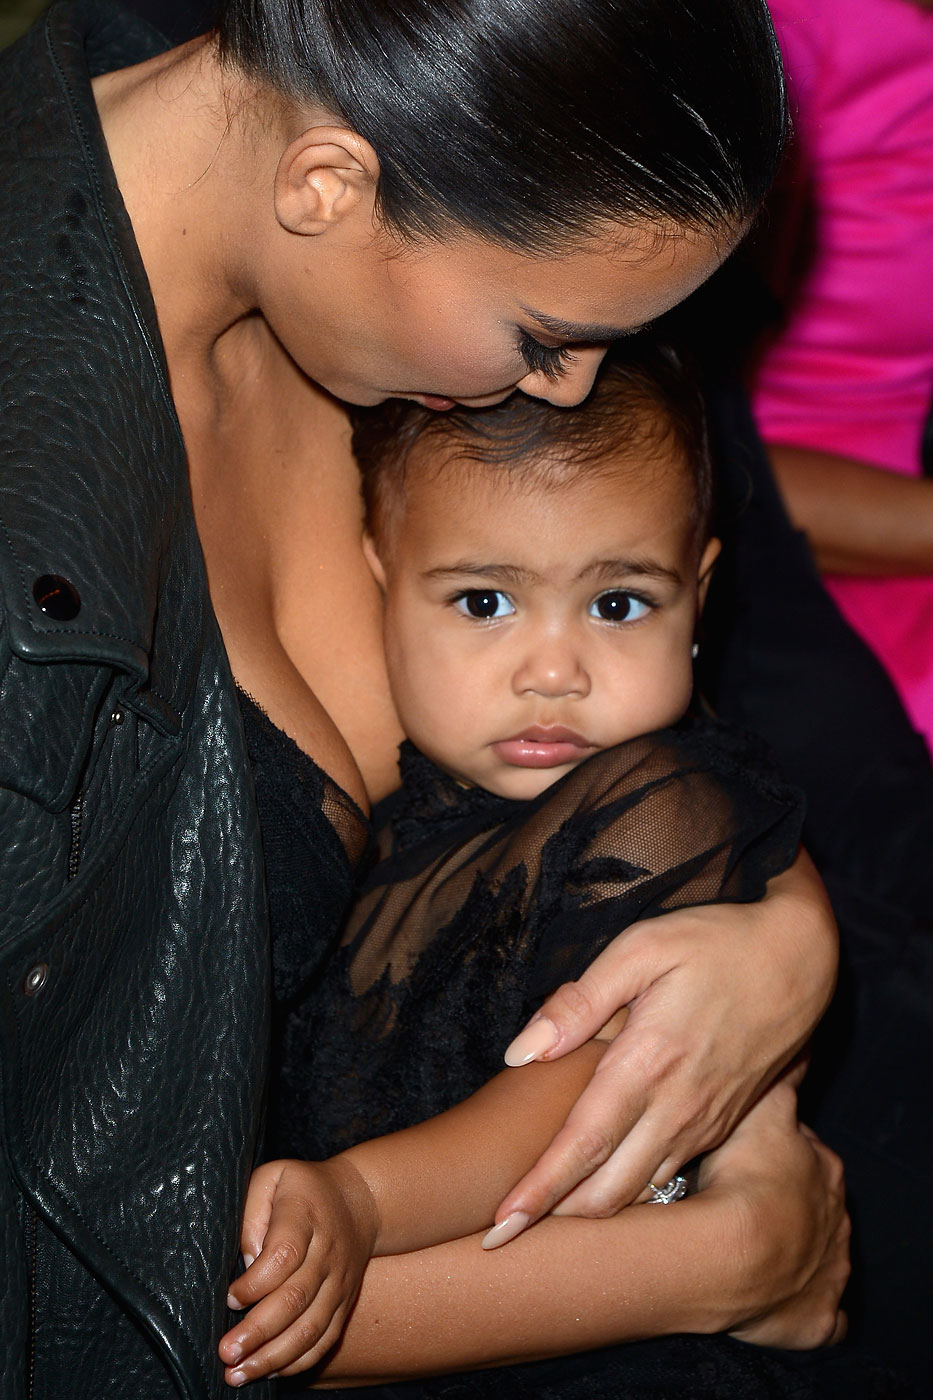 Kim Kardashian and baby North West attend the Givenchy show as part of the Paris Fashion Week on September 28, 2014 in Paris, France.